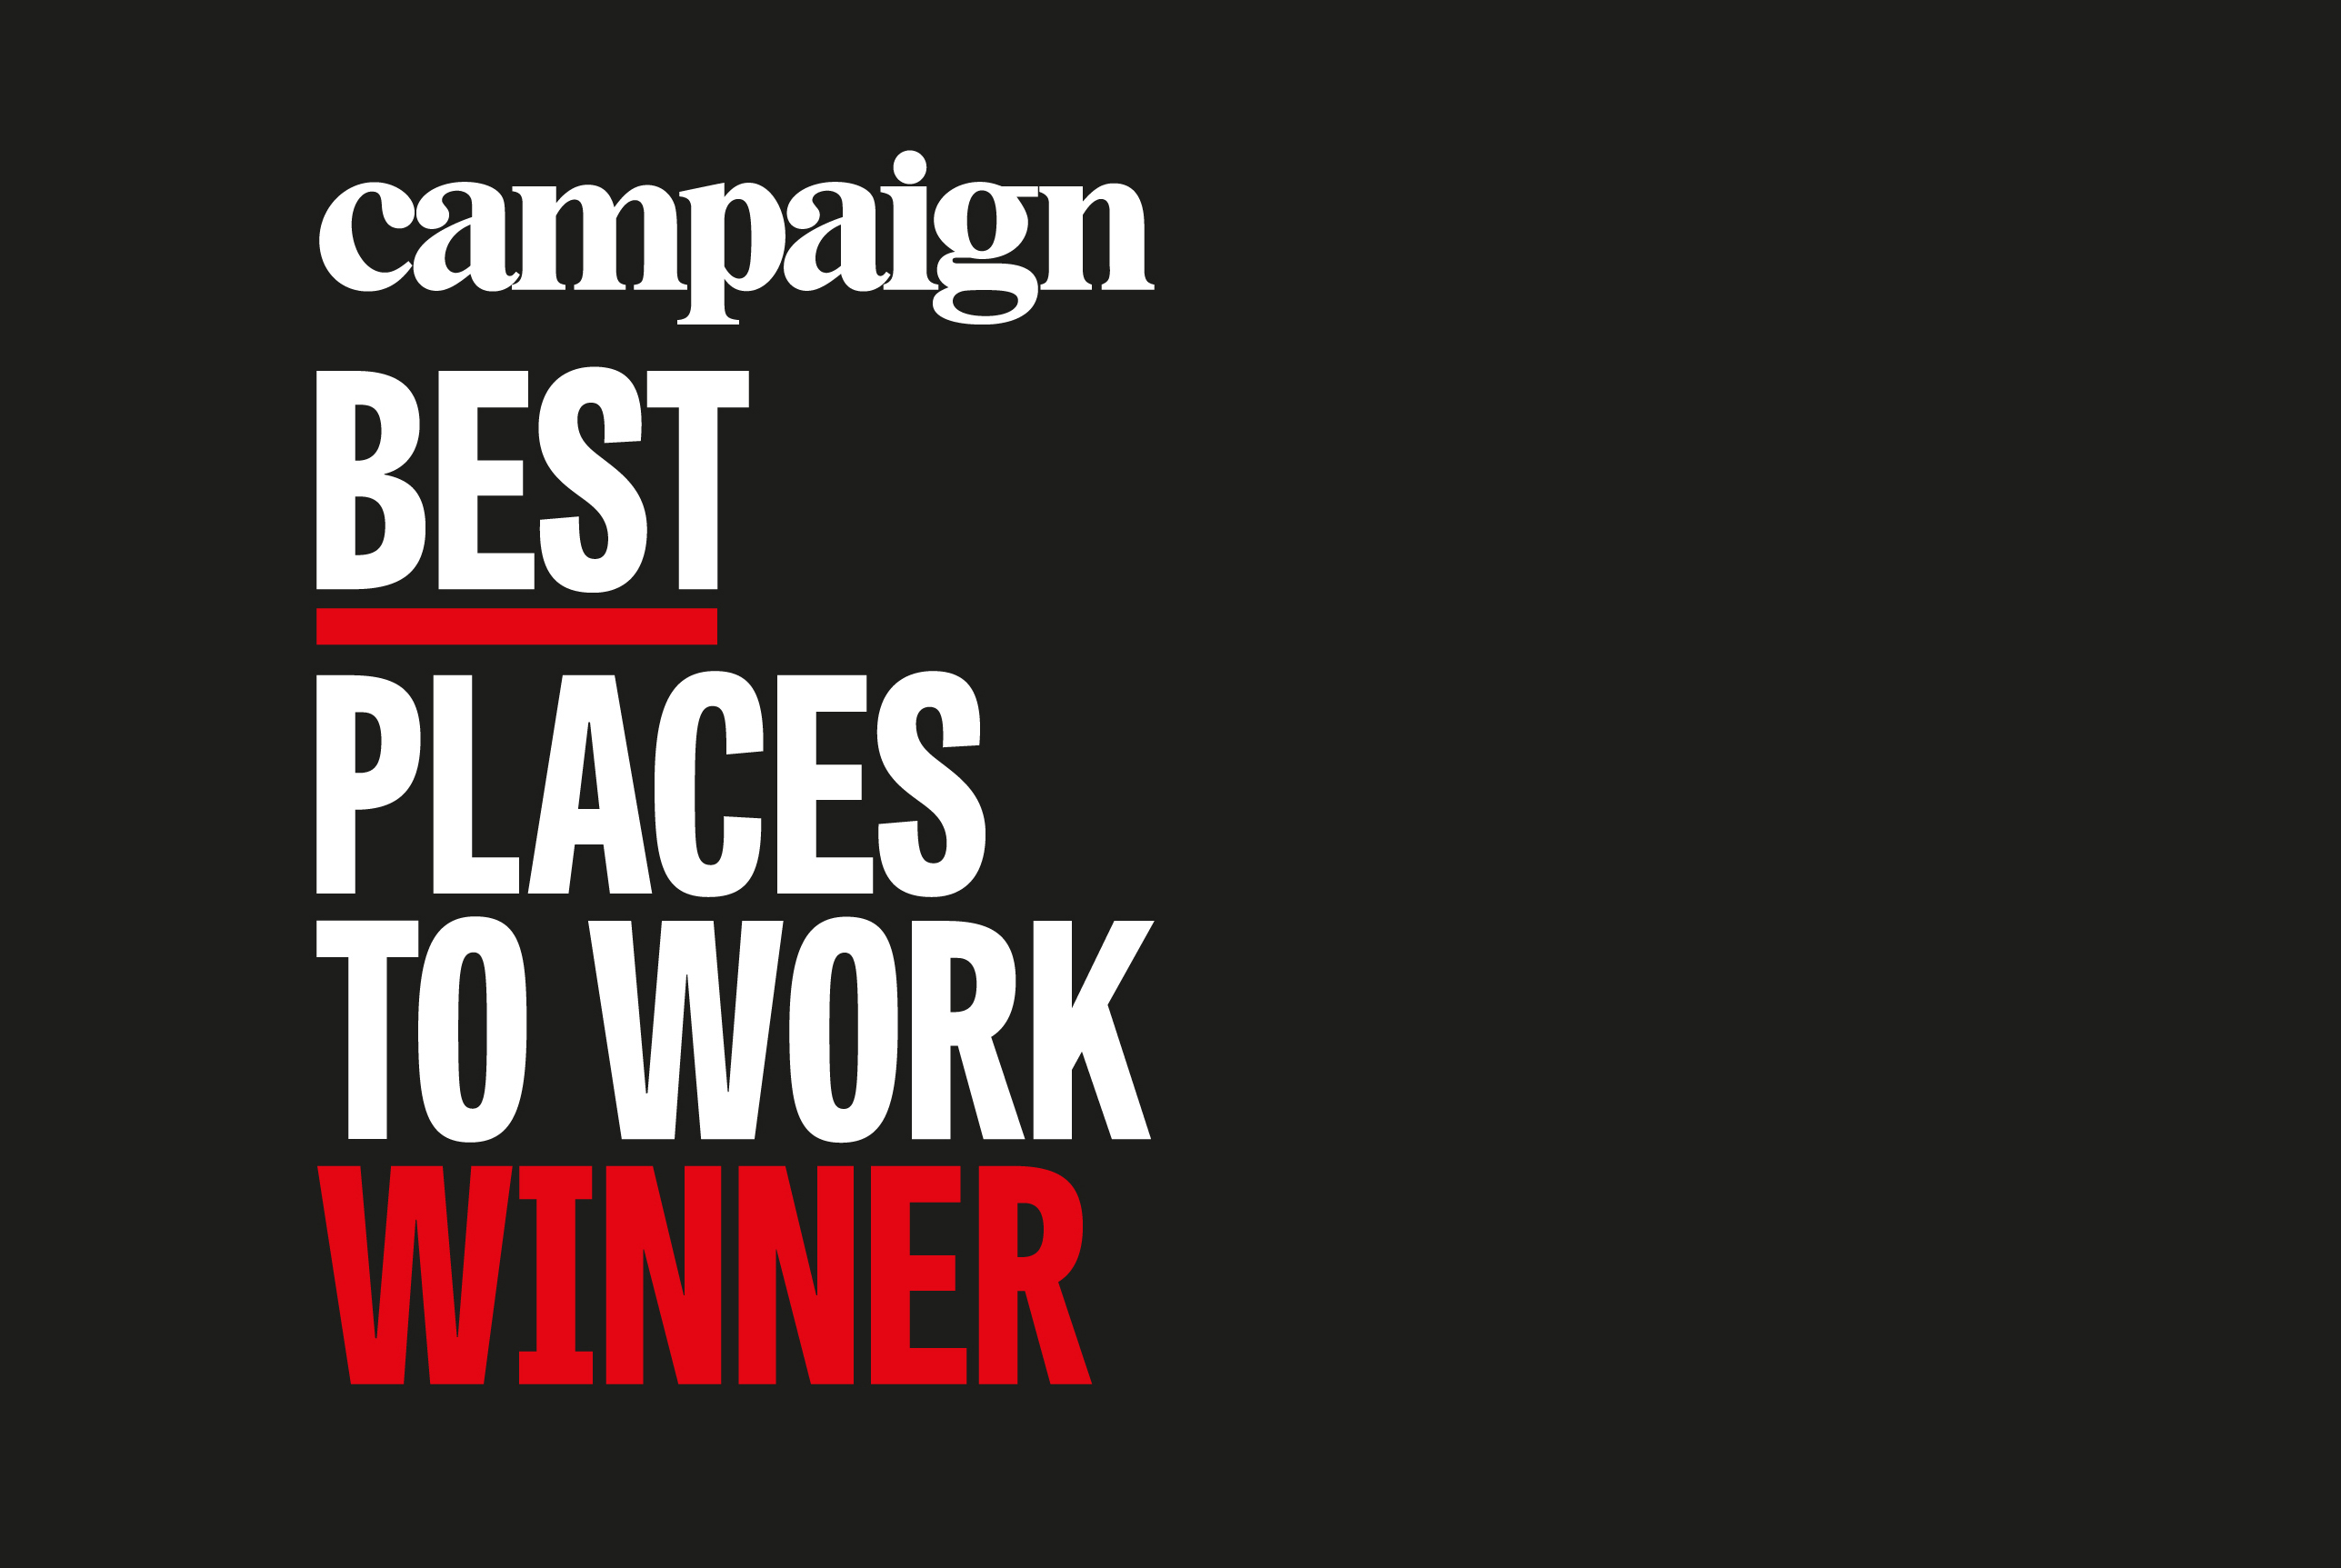 Avenue Digital named 13th in Campaign’s 2020 Best Place to Work Awards